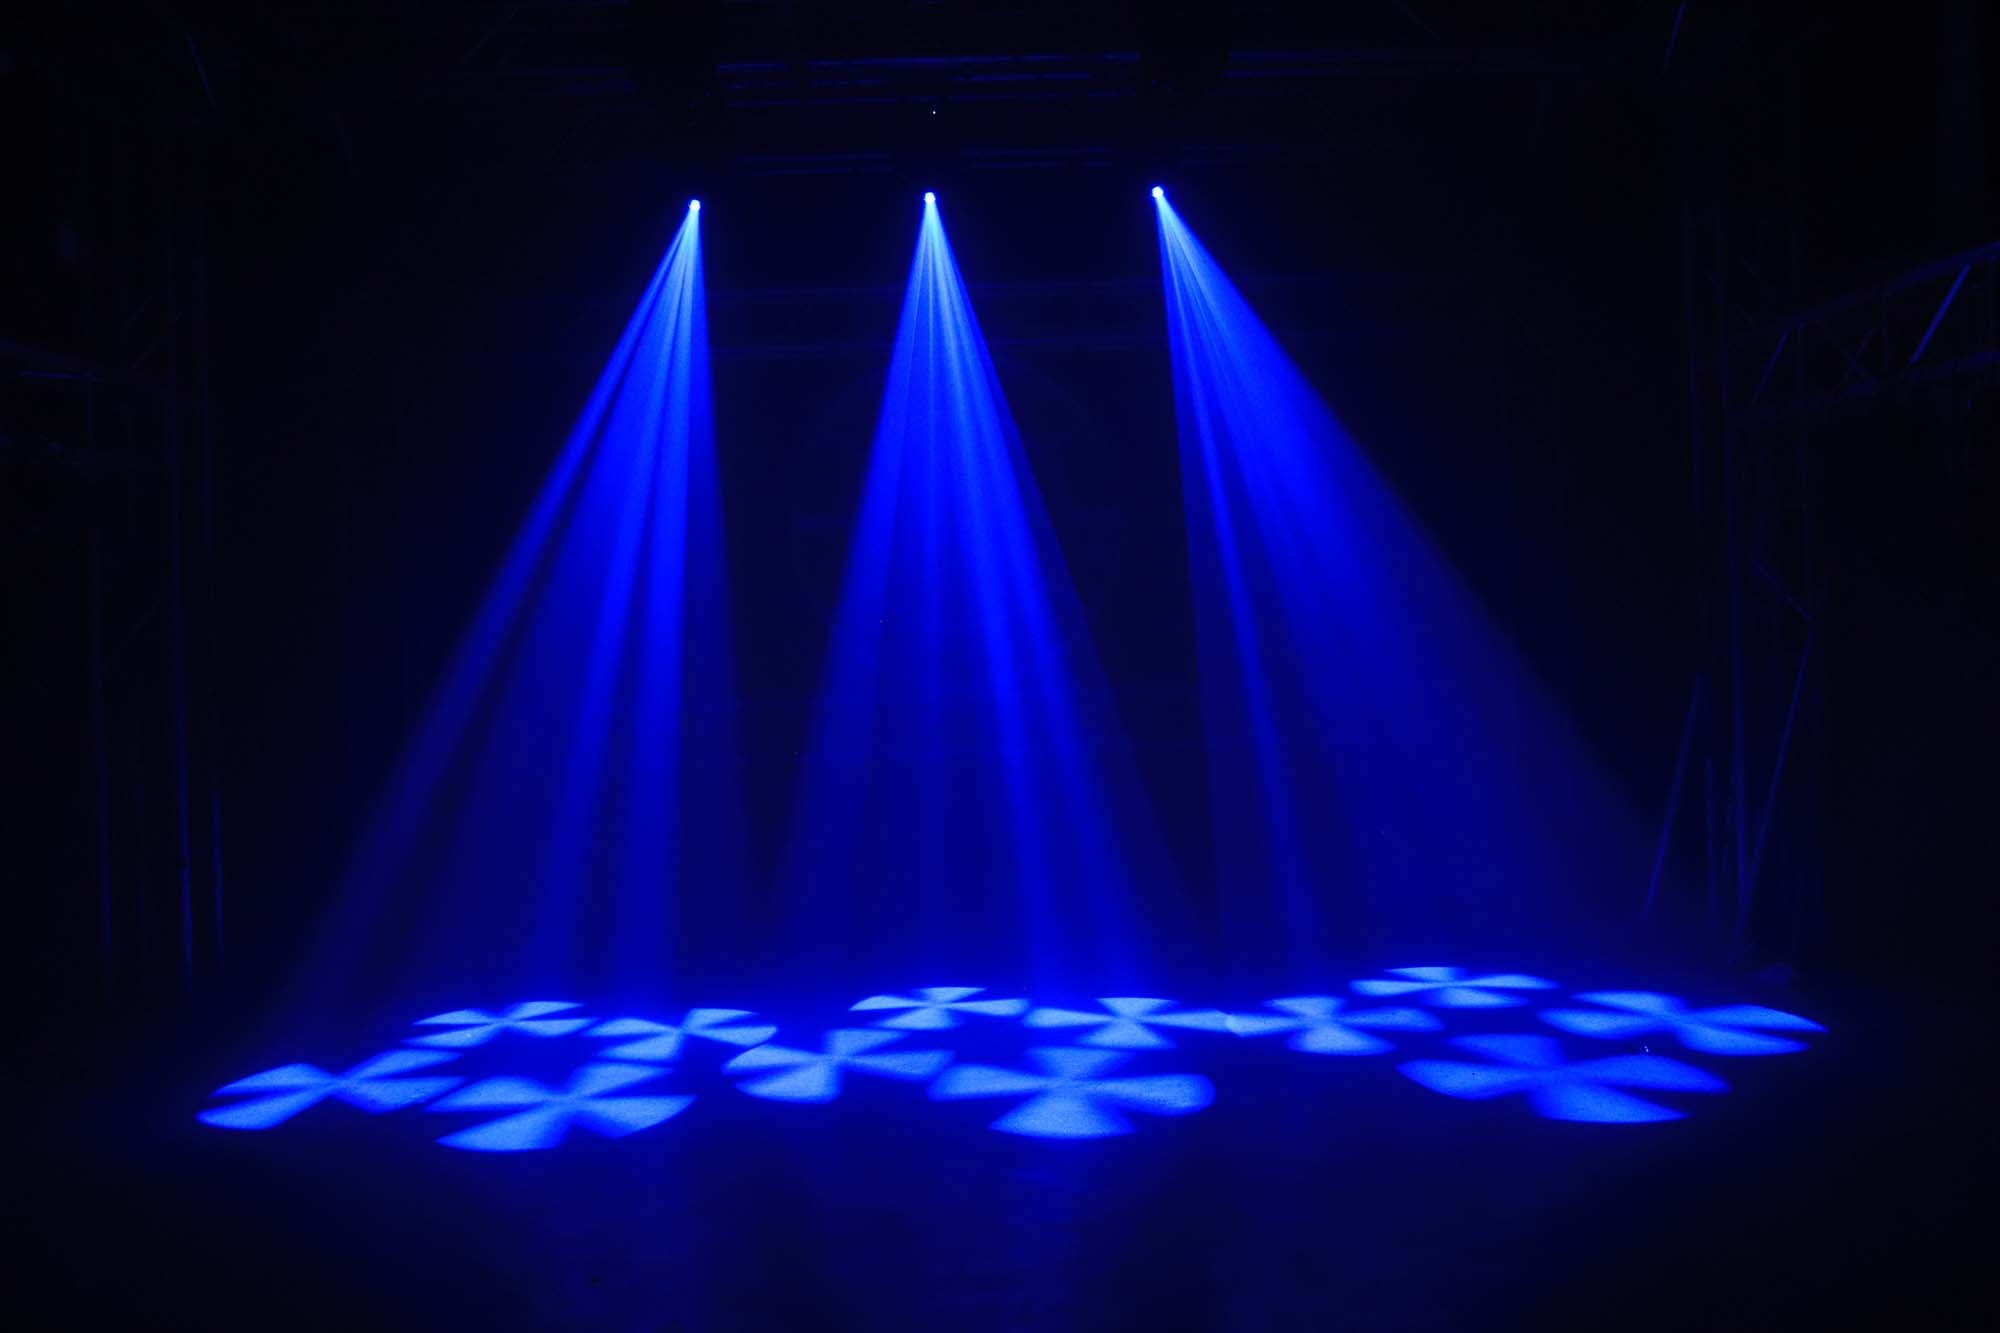 Moving Head Lights LED 150W Beam Effect 17 Gobos 14 Colors Spotlights 4-Facet Prism DMX512 with RDM and Linear Focus Dj Stage Lights for Chrismas Wedding Party Dance